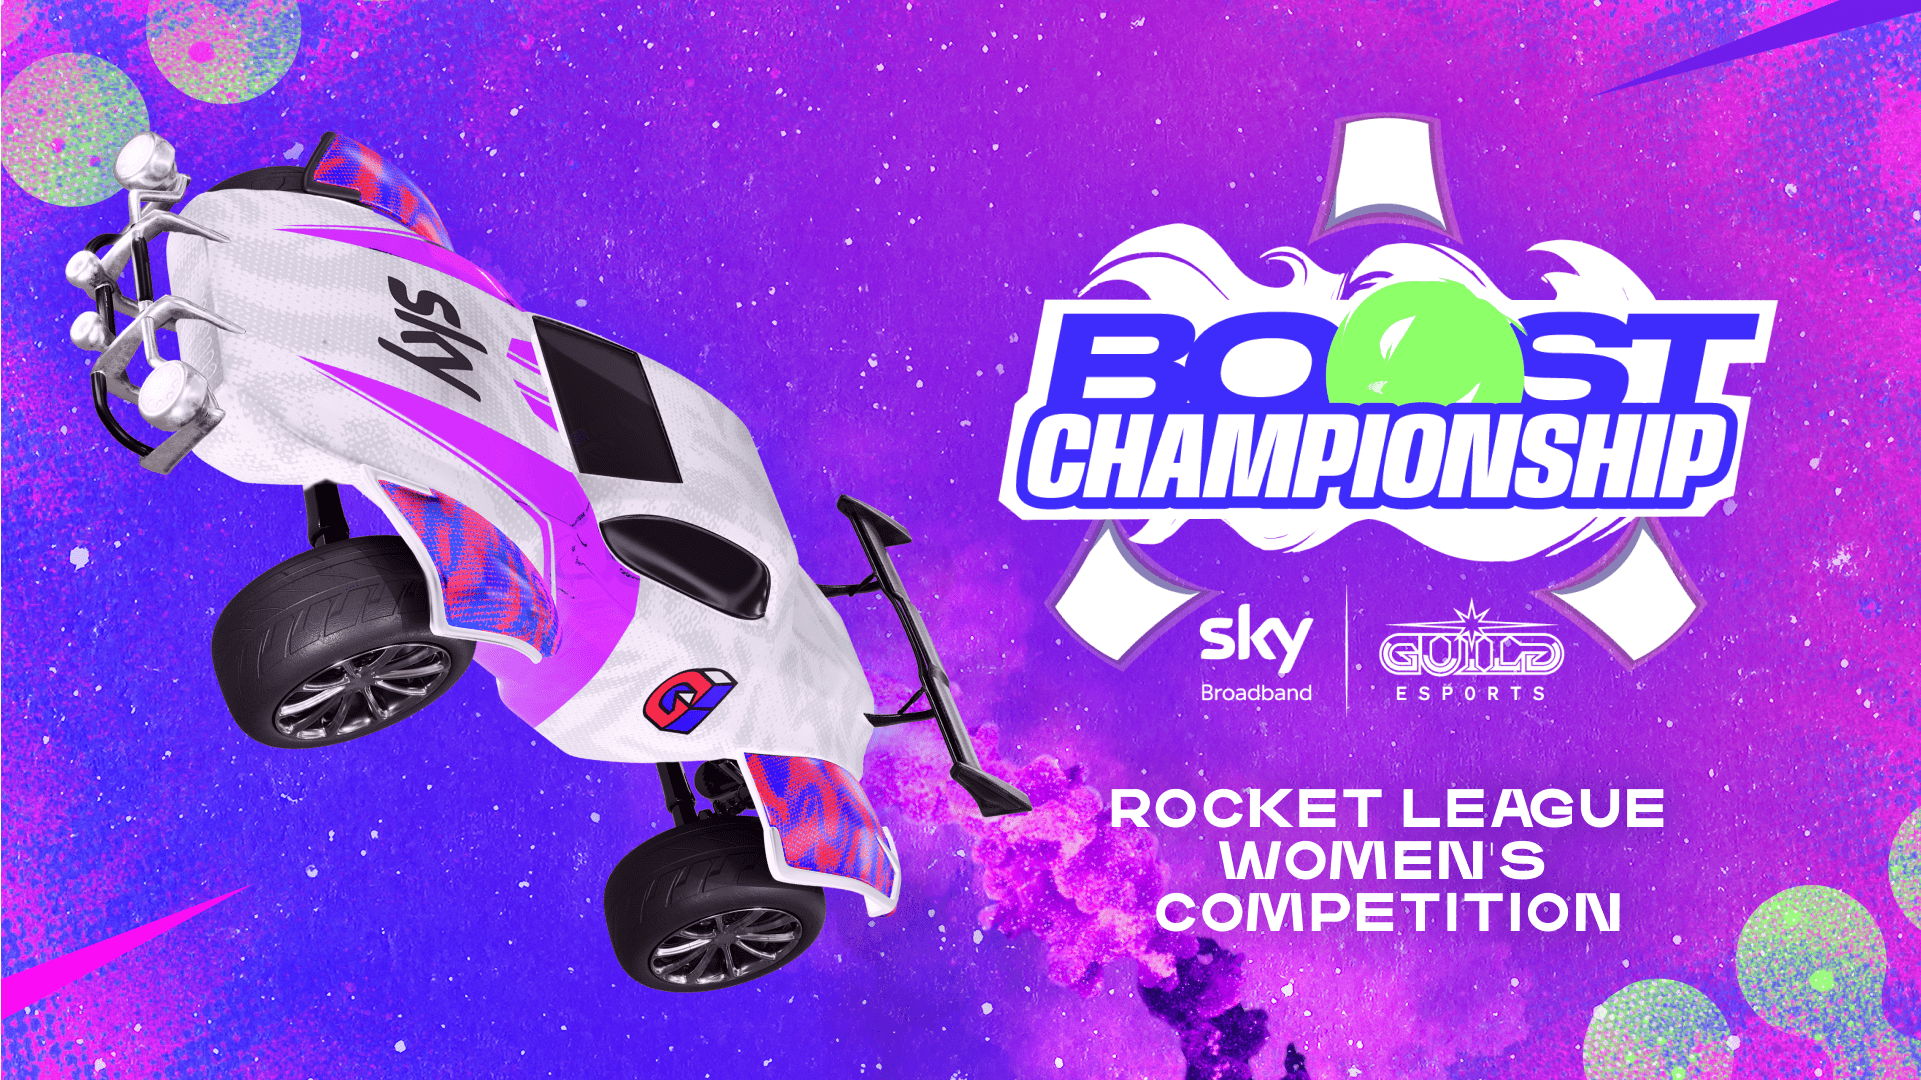 Guild and Sky launch womens rocket league esports competition